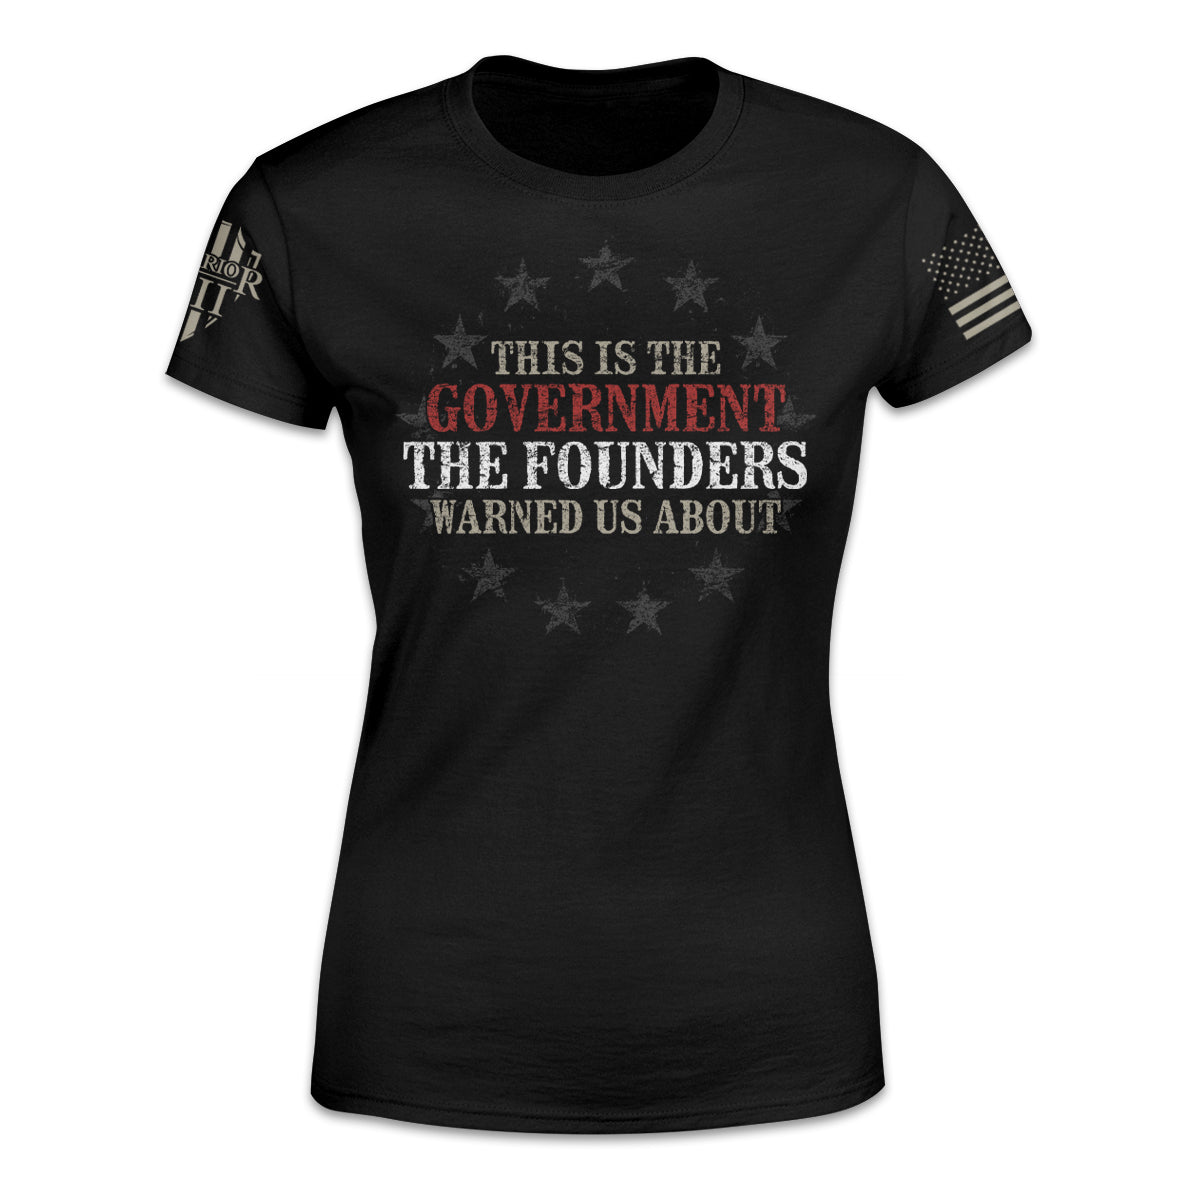 A black women's relaxed fit shirt with the words "This is the government the founders warned us about" printed on the front.